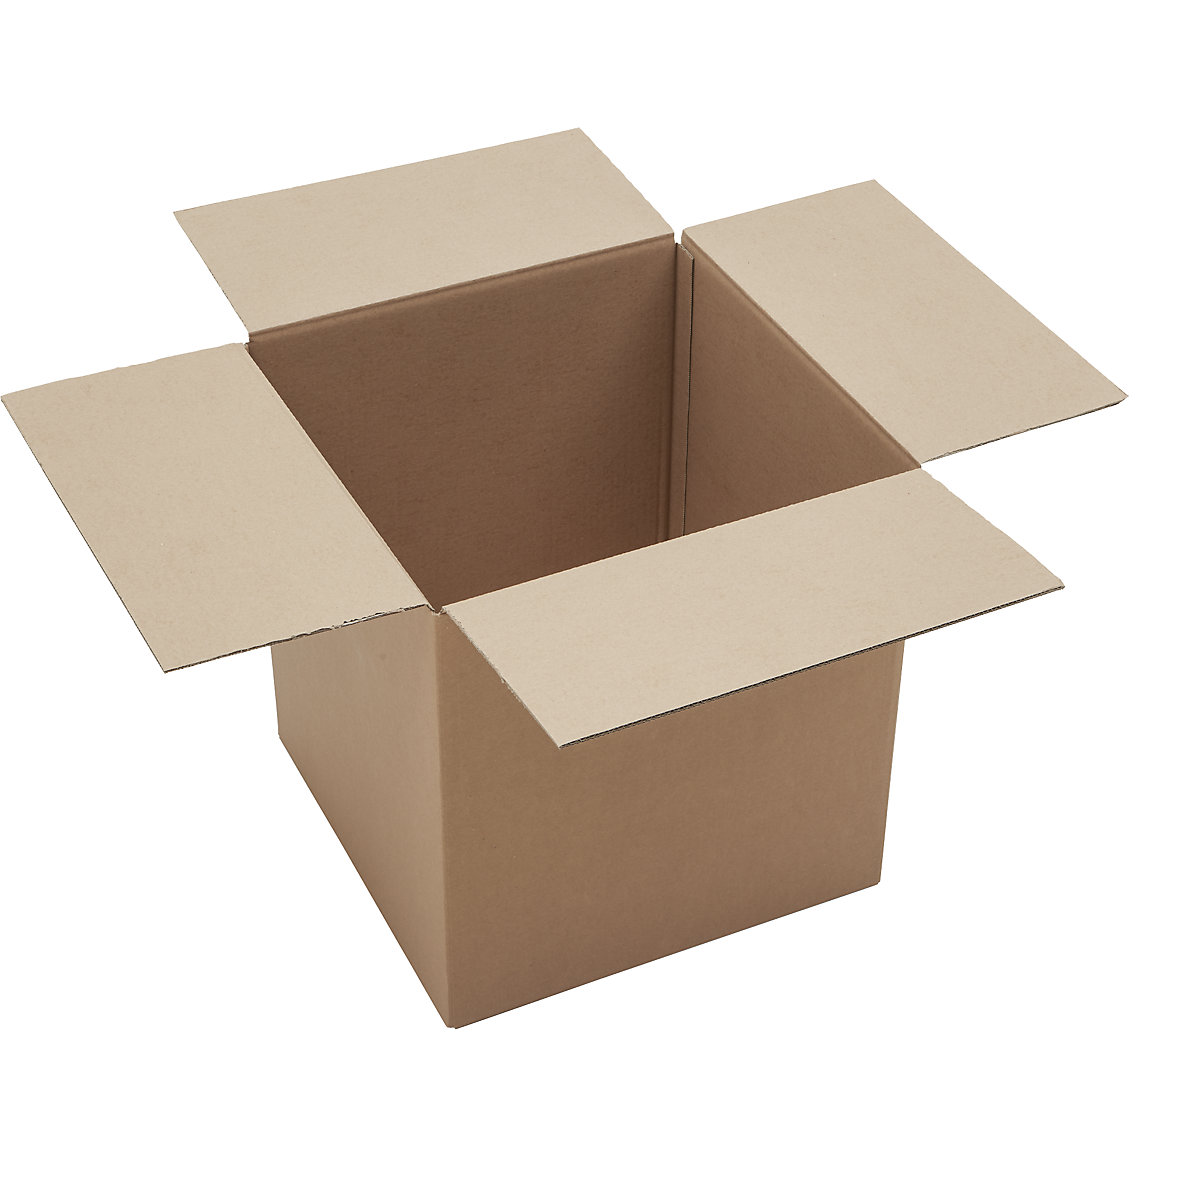 Corrugated cardboard folding boxes, FEFCO 0201, double fluted, pack of 50, internal dimensions 375 x 375 x 400 mm-13